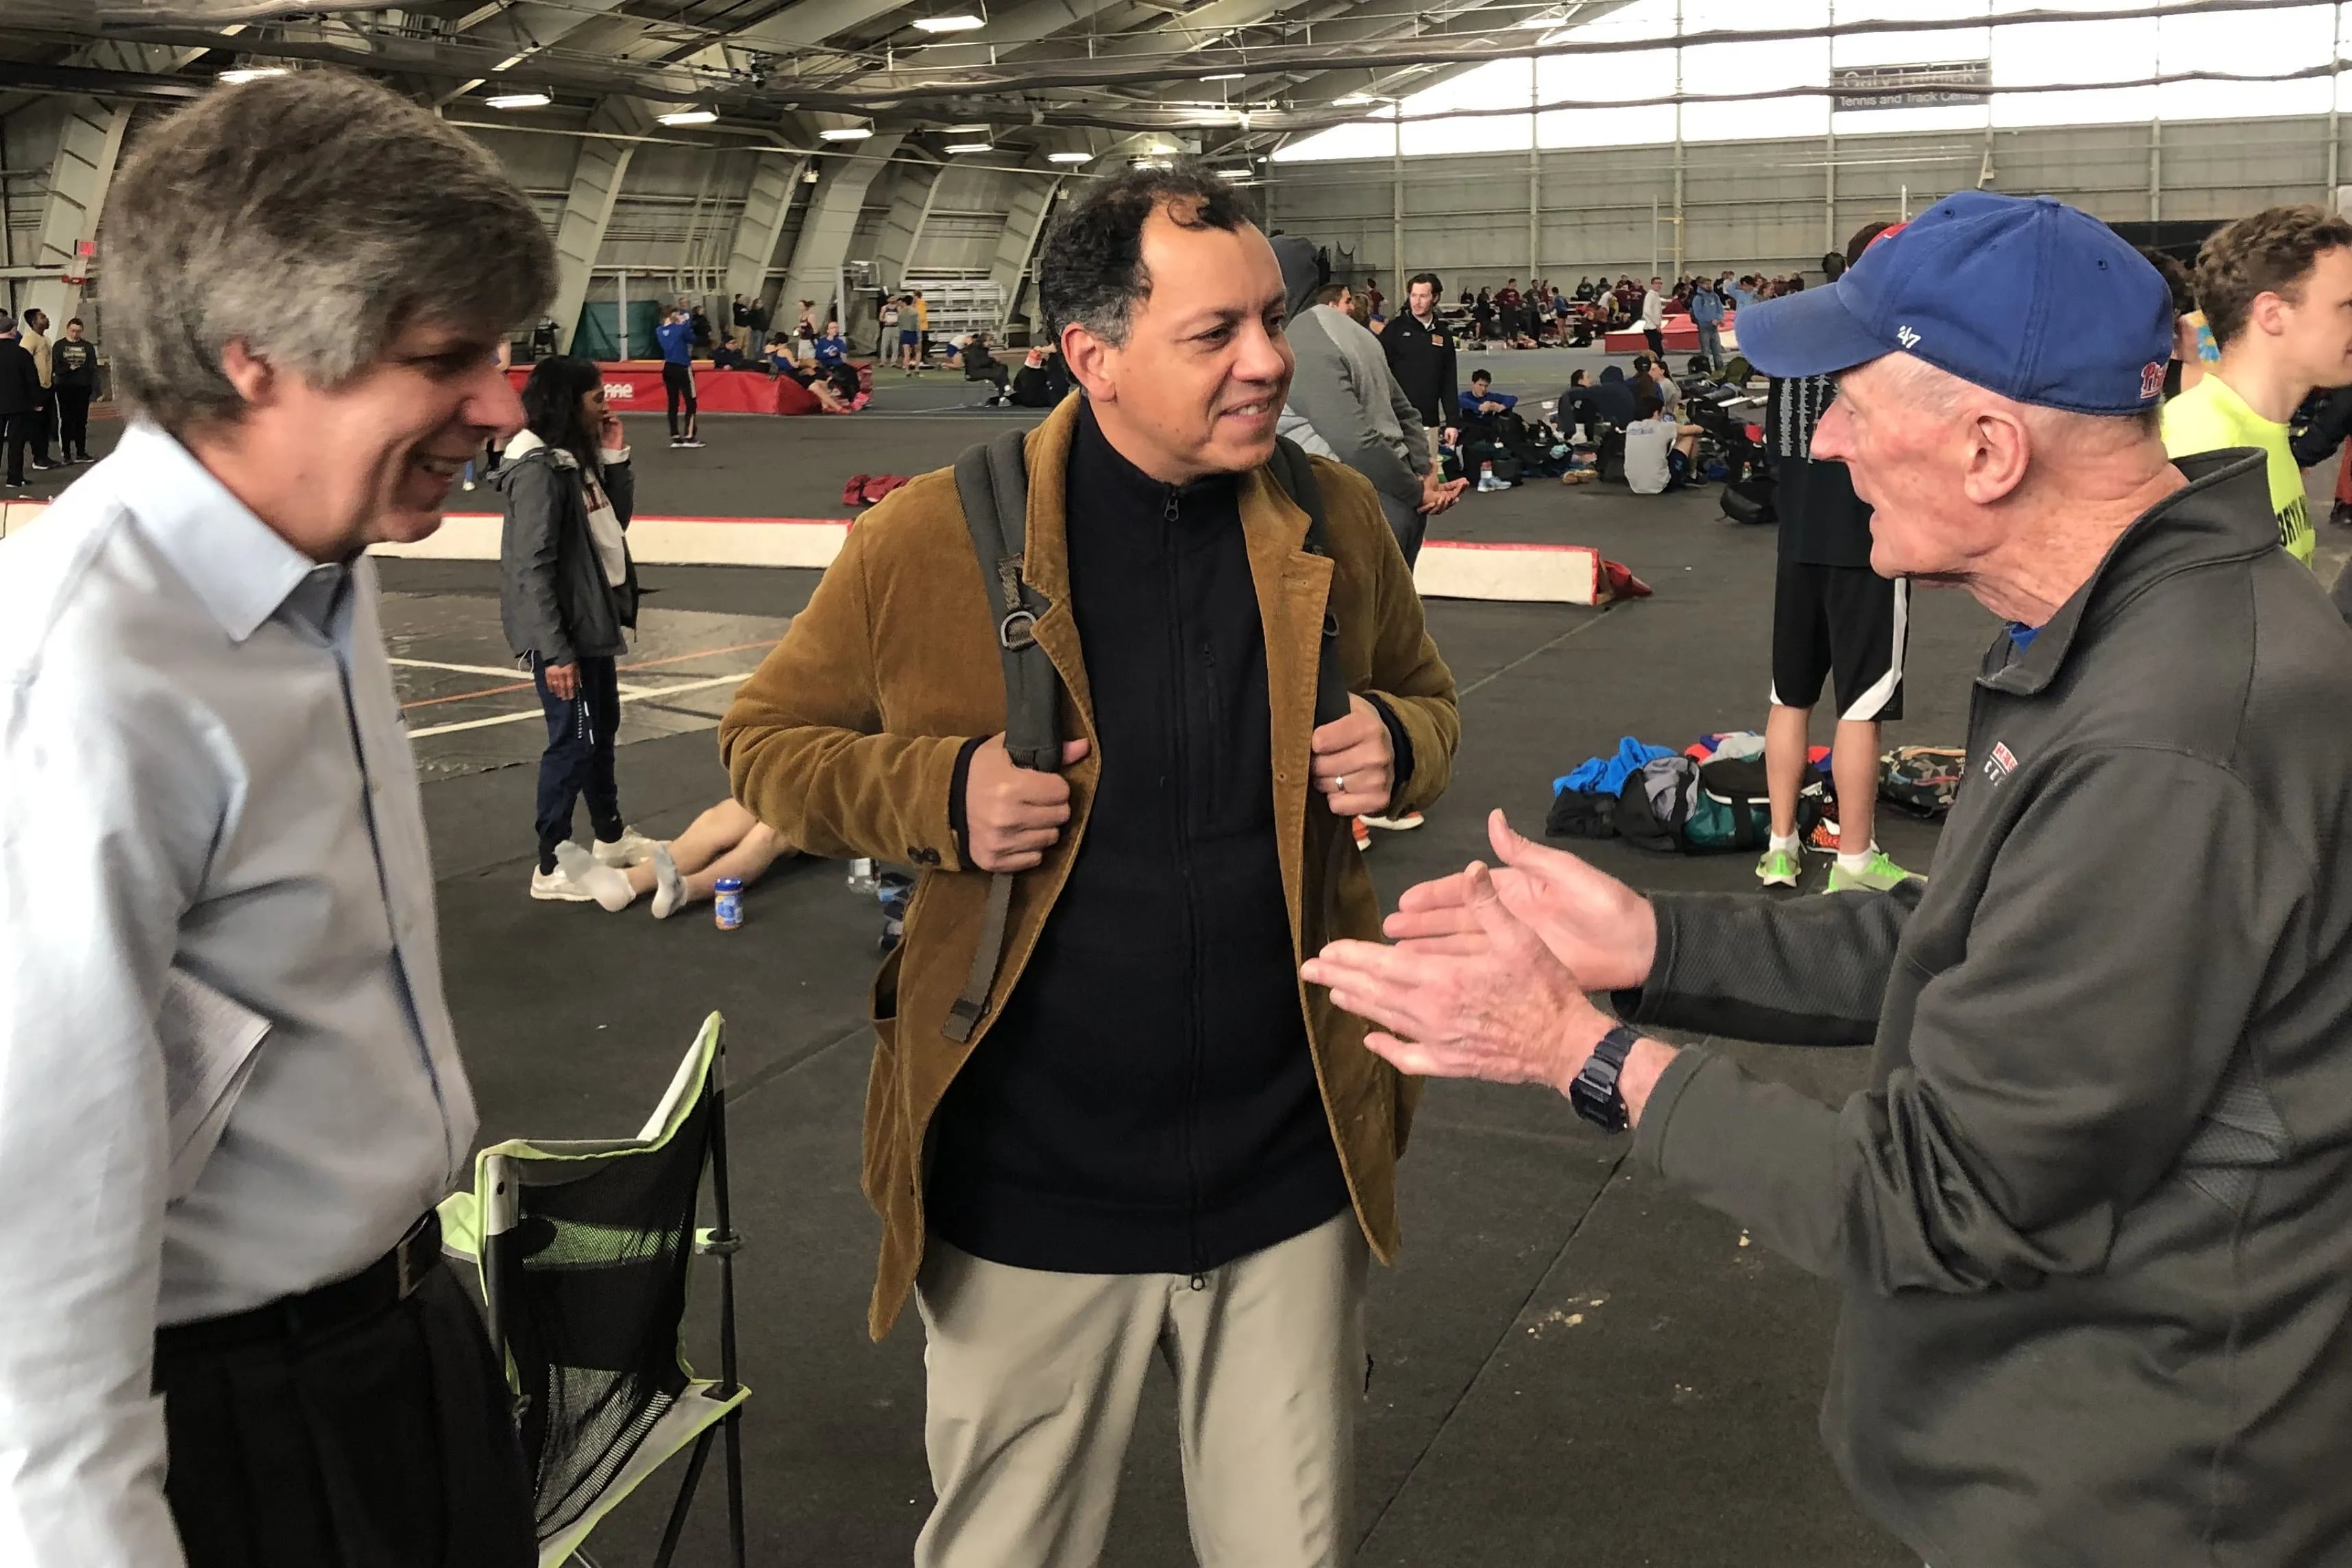 Haverford track coach Tom Donnelly (right) with former assistant Michael McGrath (left) and Robard Williams, who still holds five school records set in the late 1980s.